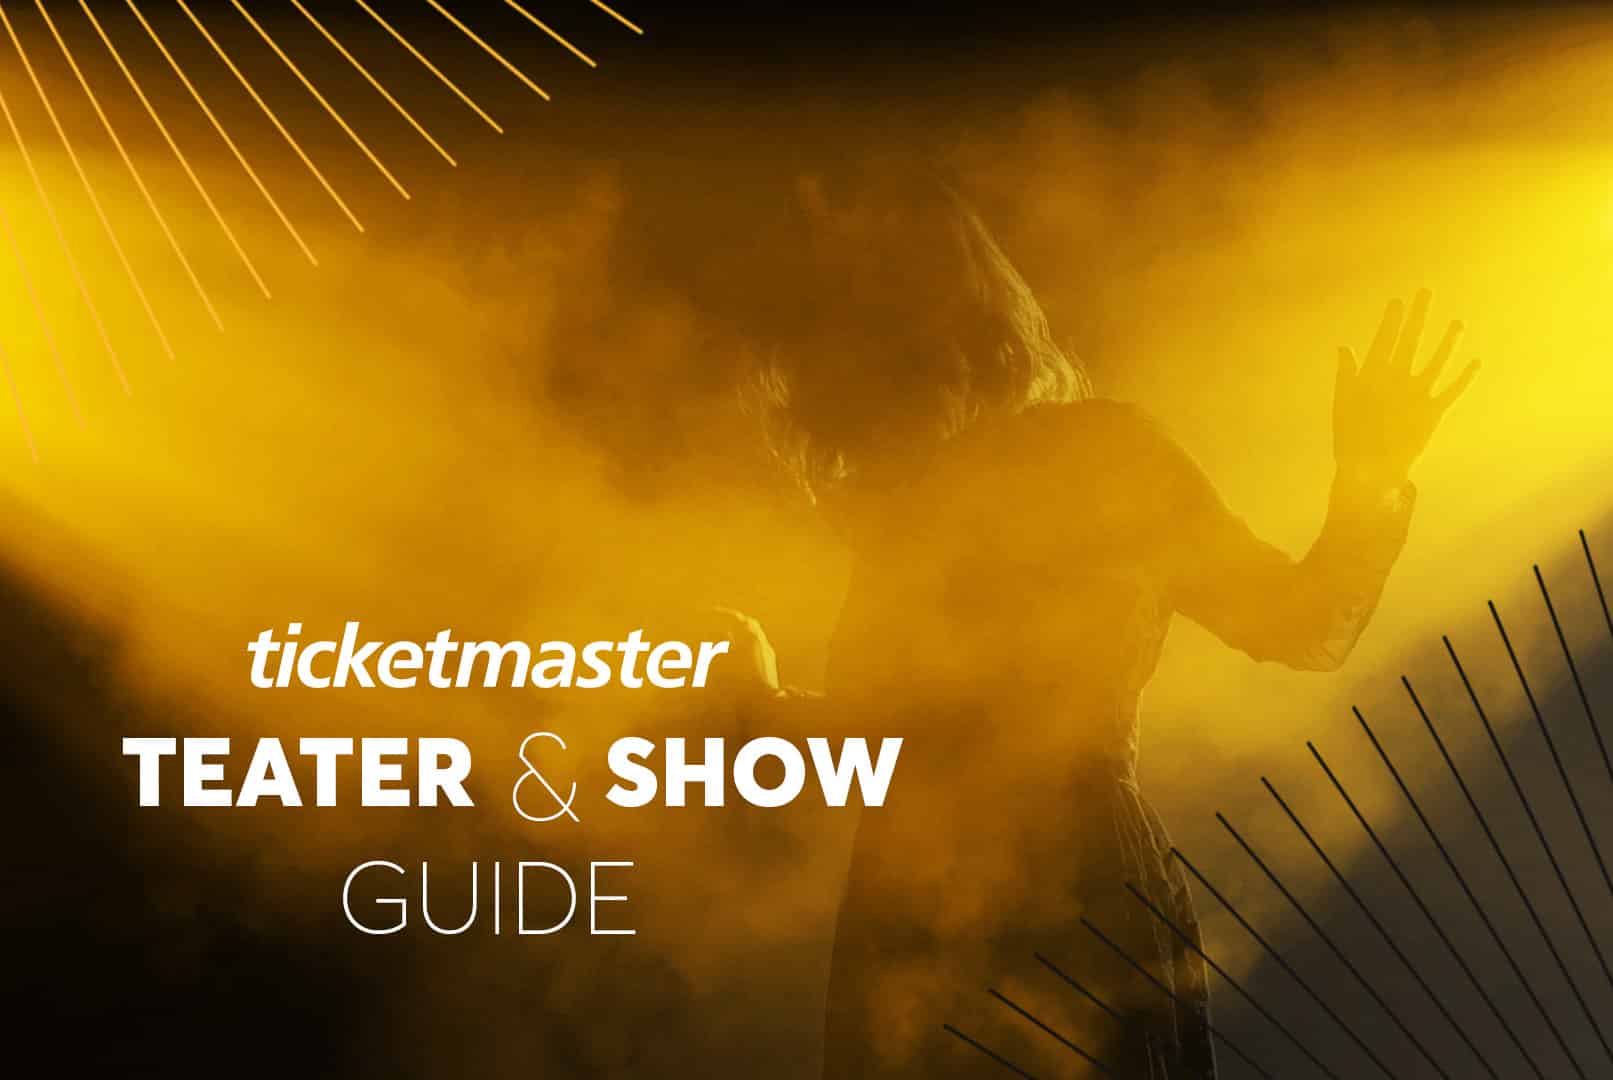 Teater & Show guide